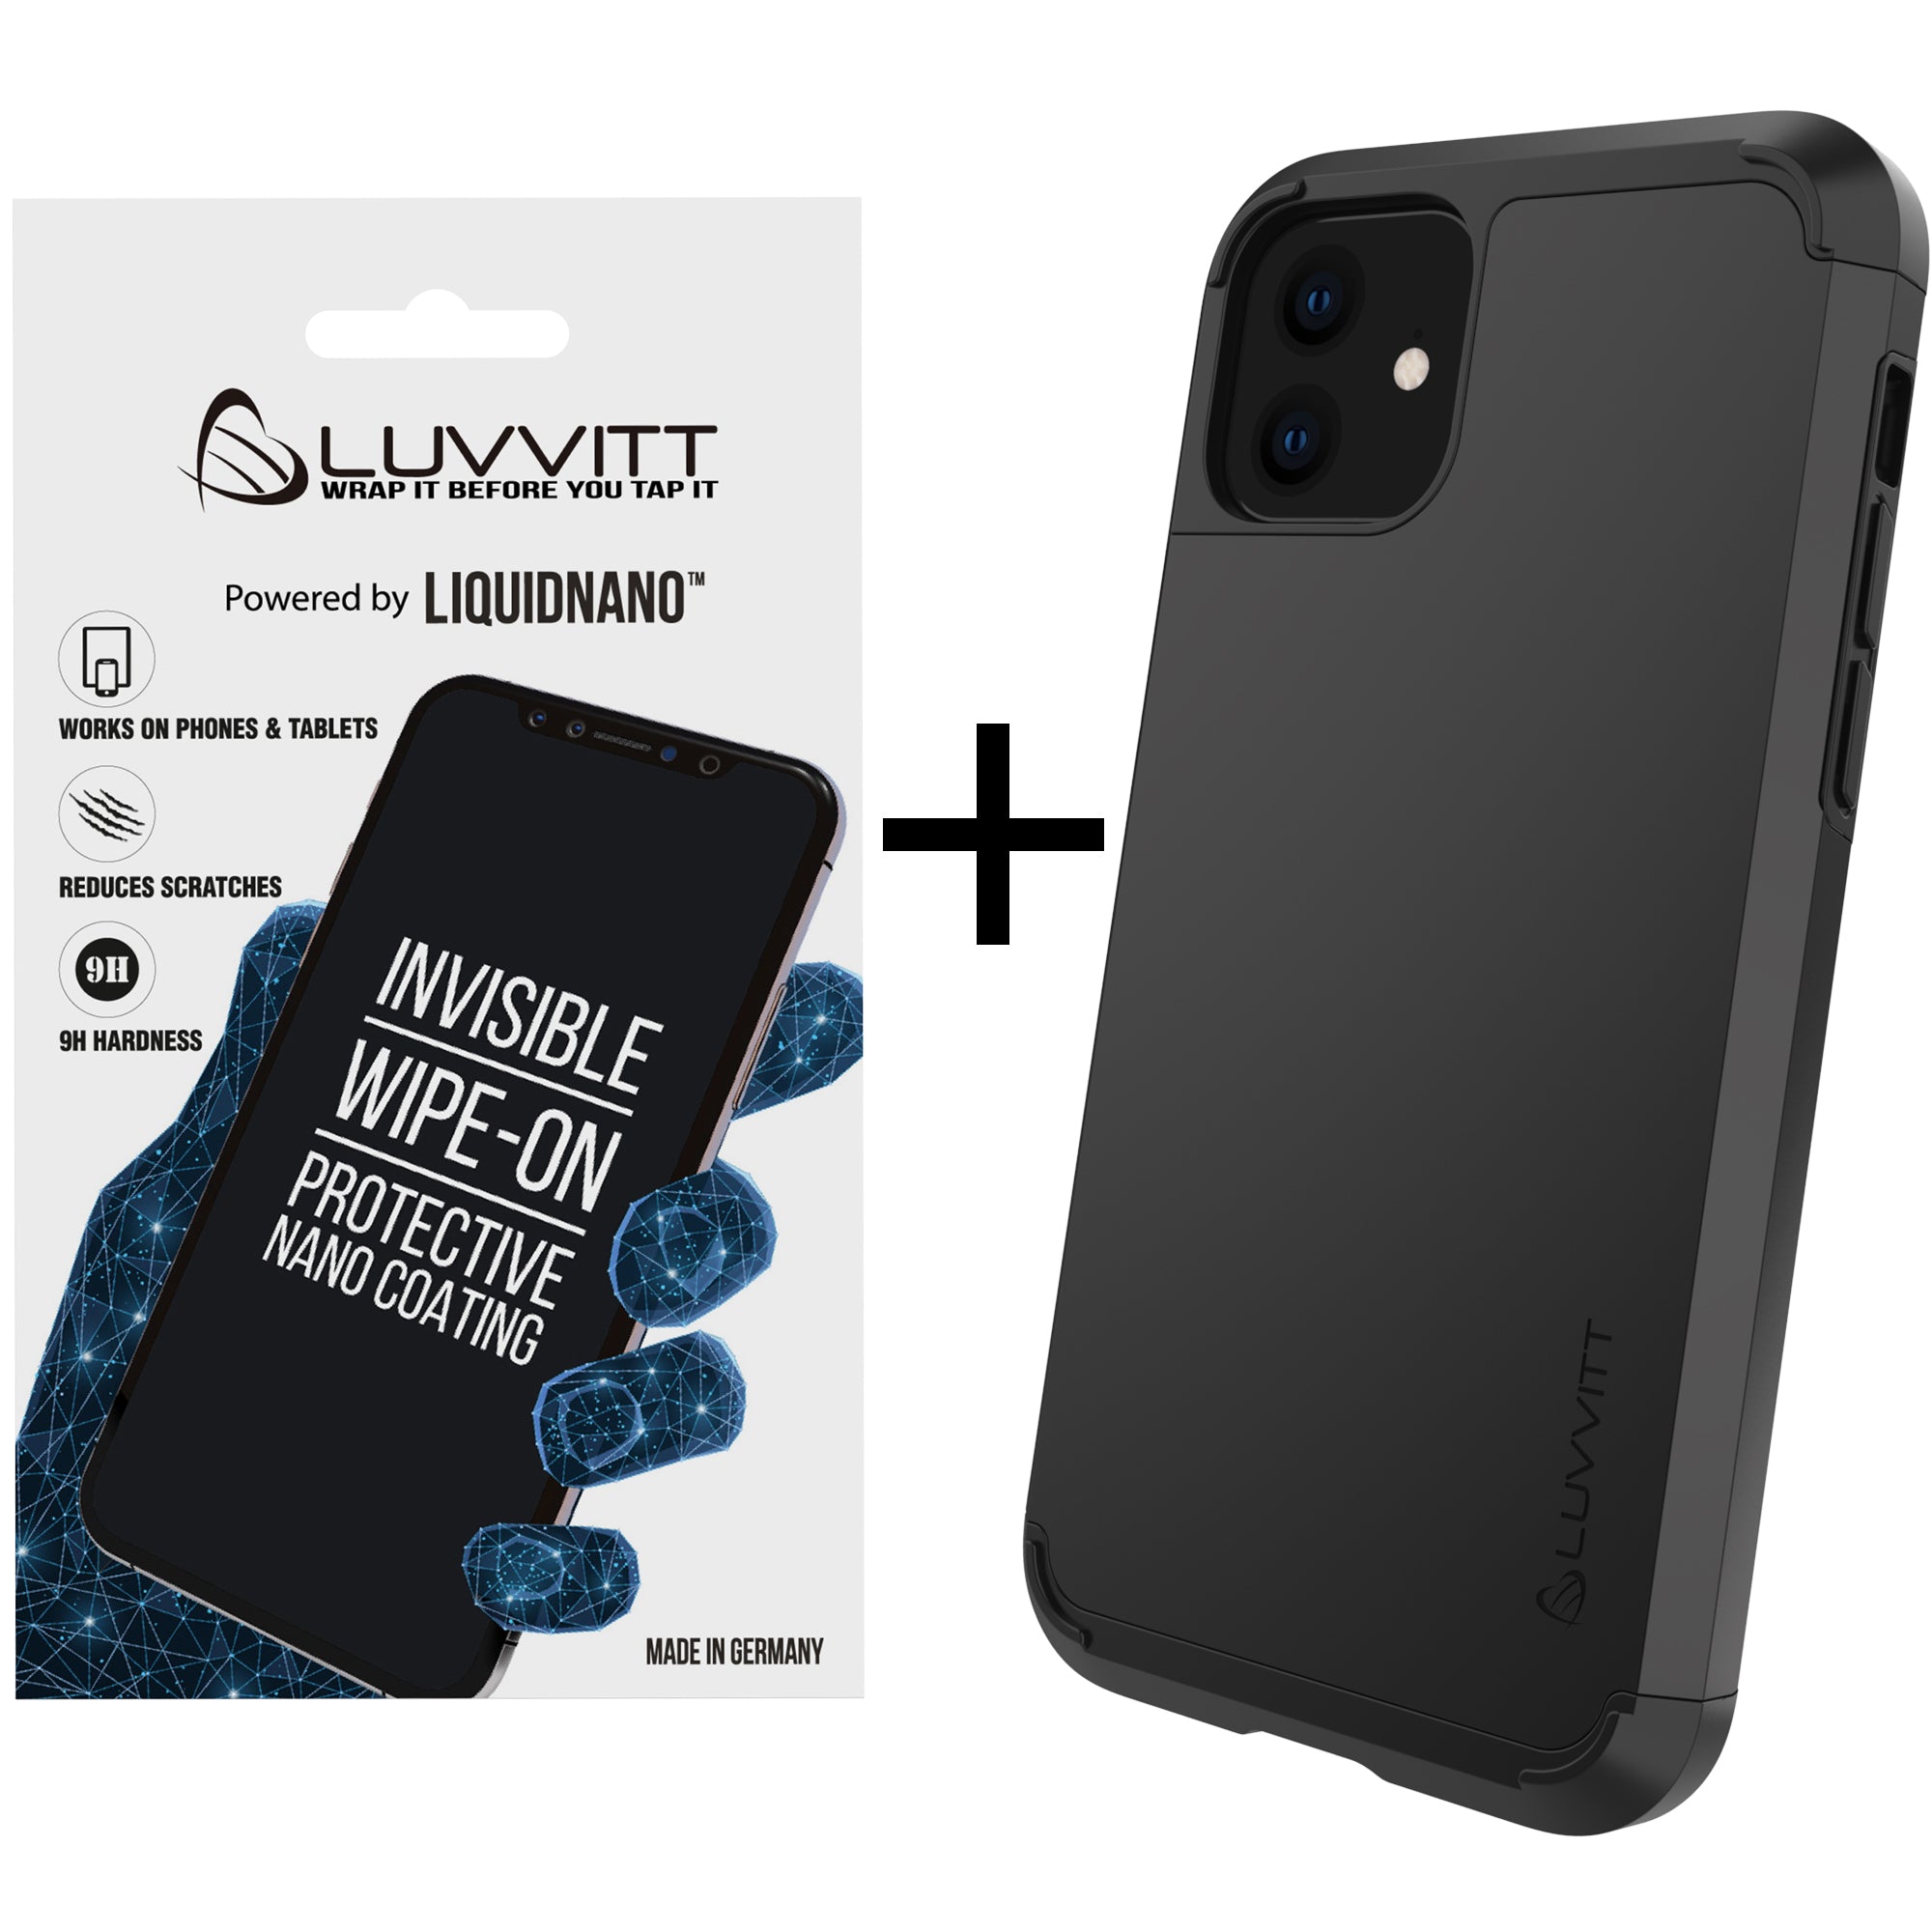 Luvvitt Ultra Armor Case and Liquid Glass Screen Protector Bundle for iPhone 11 2019 - Black